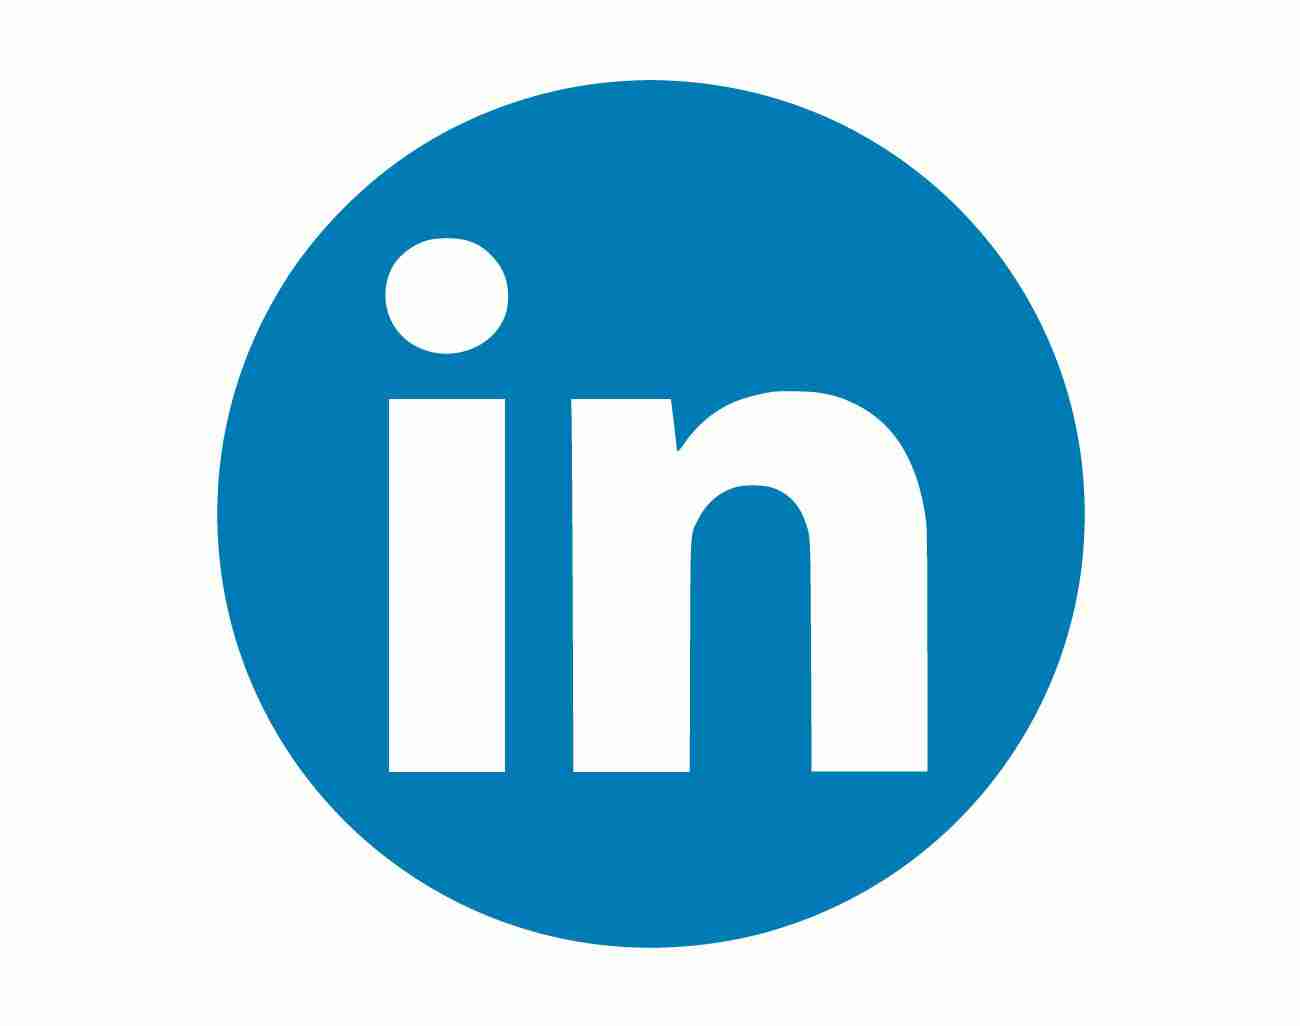 Изображение: LINKEDIN.COM ❎ EMAIL ADDRESS IS INCLUDED |USER AGENT AND COOKIES INCLUDED | GENDER - MIX | PARTIALLY COMPLETED | REGISTERED - MIX IP | HIGH QUALITY CREATED IN 2024 ⌛️